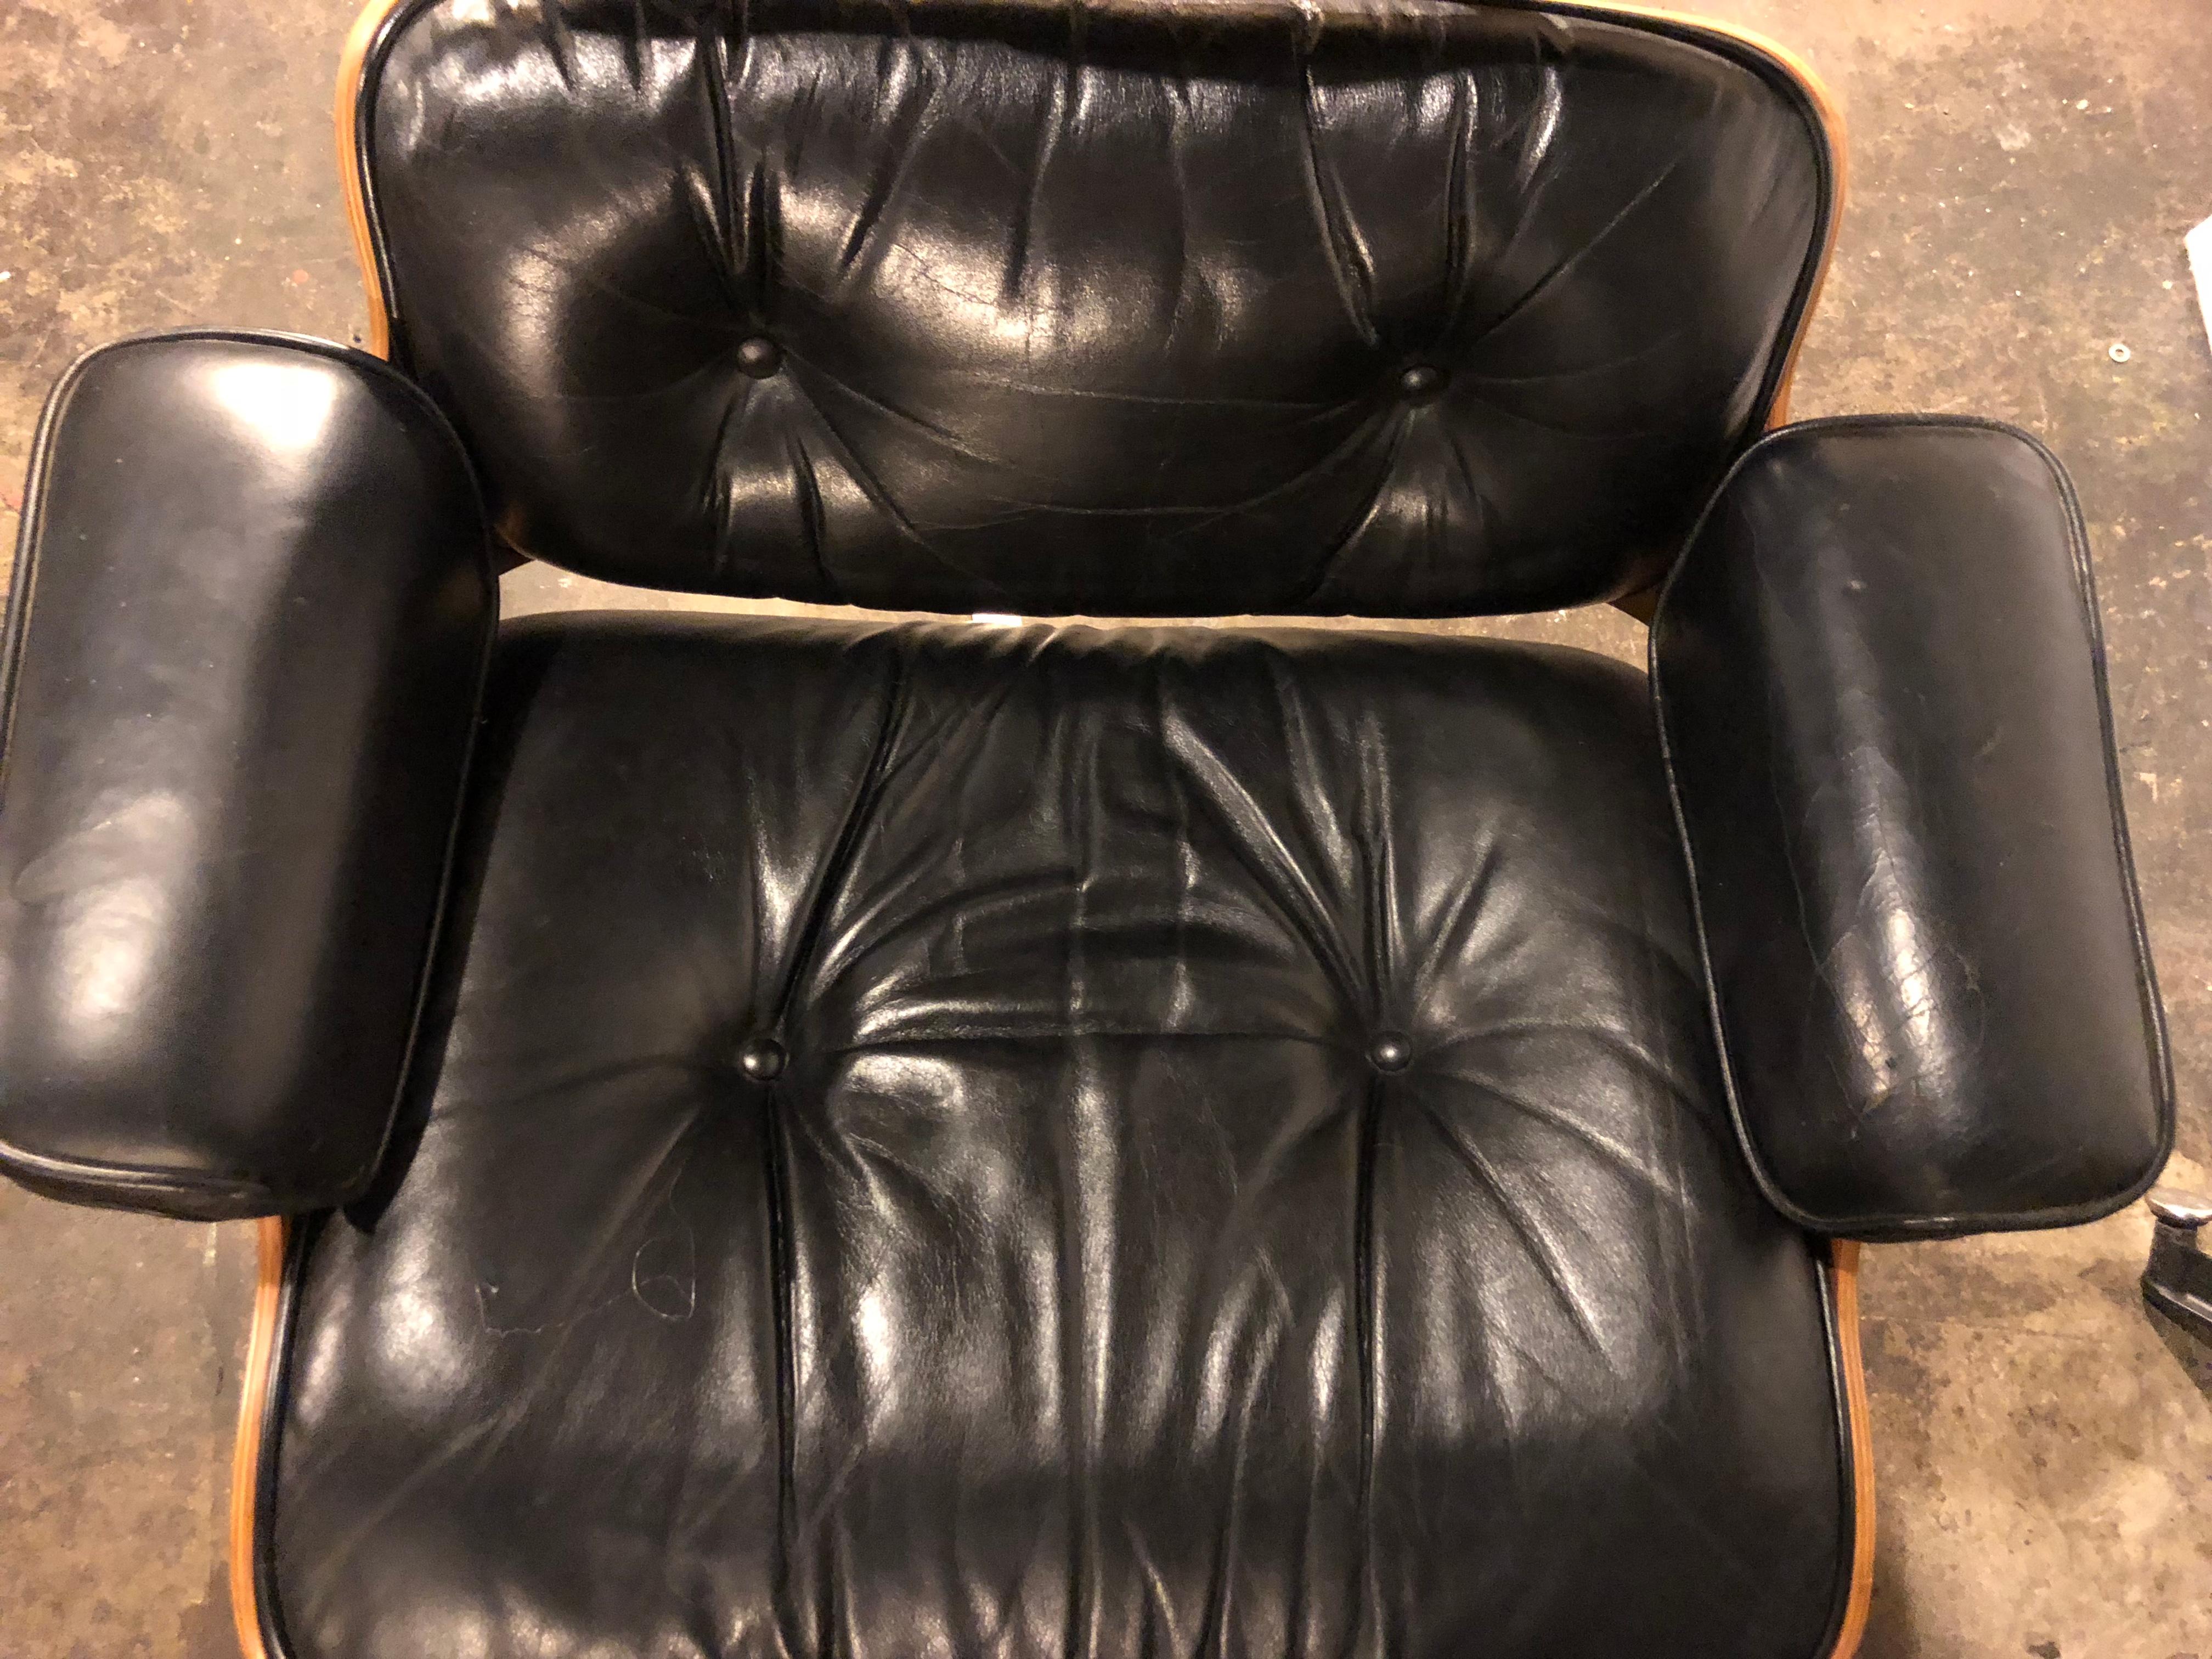 Spectacular Herman Miller Eames Lounge Chair and Ottoman 6